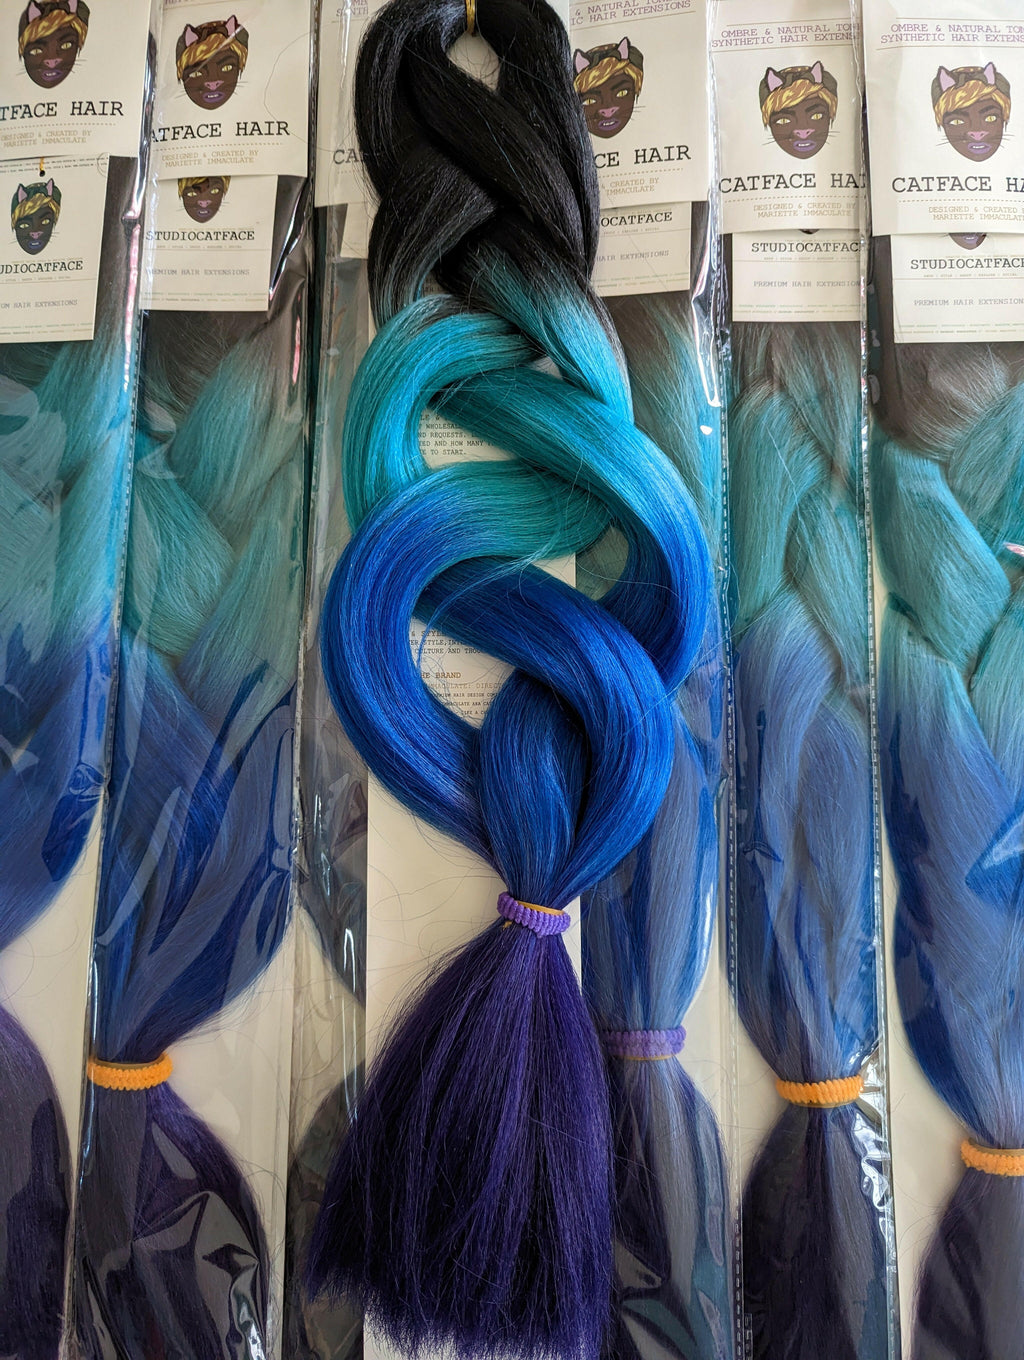 SEA & BERRY BLUES  - FOUR TONE OMBRE 24 INCHES CATFACE HAIR